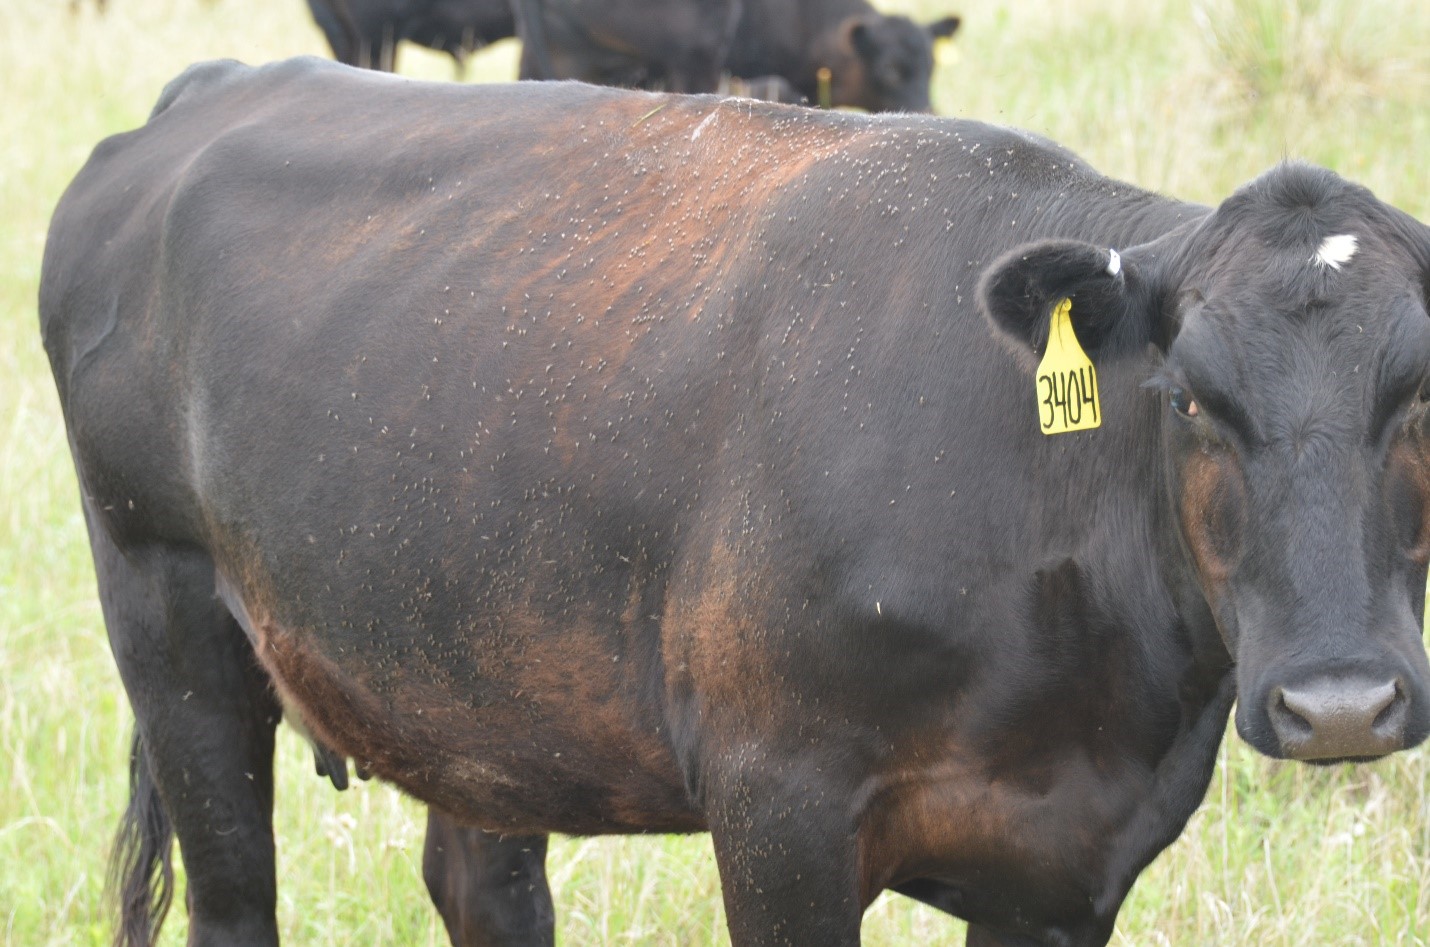 Large populations of horn flies on pastured cattle impose significant economic impacts.  Photo courtesy of Dave Boxler.